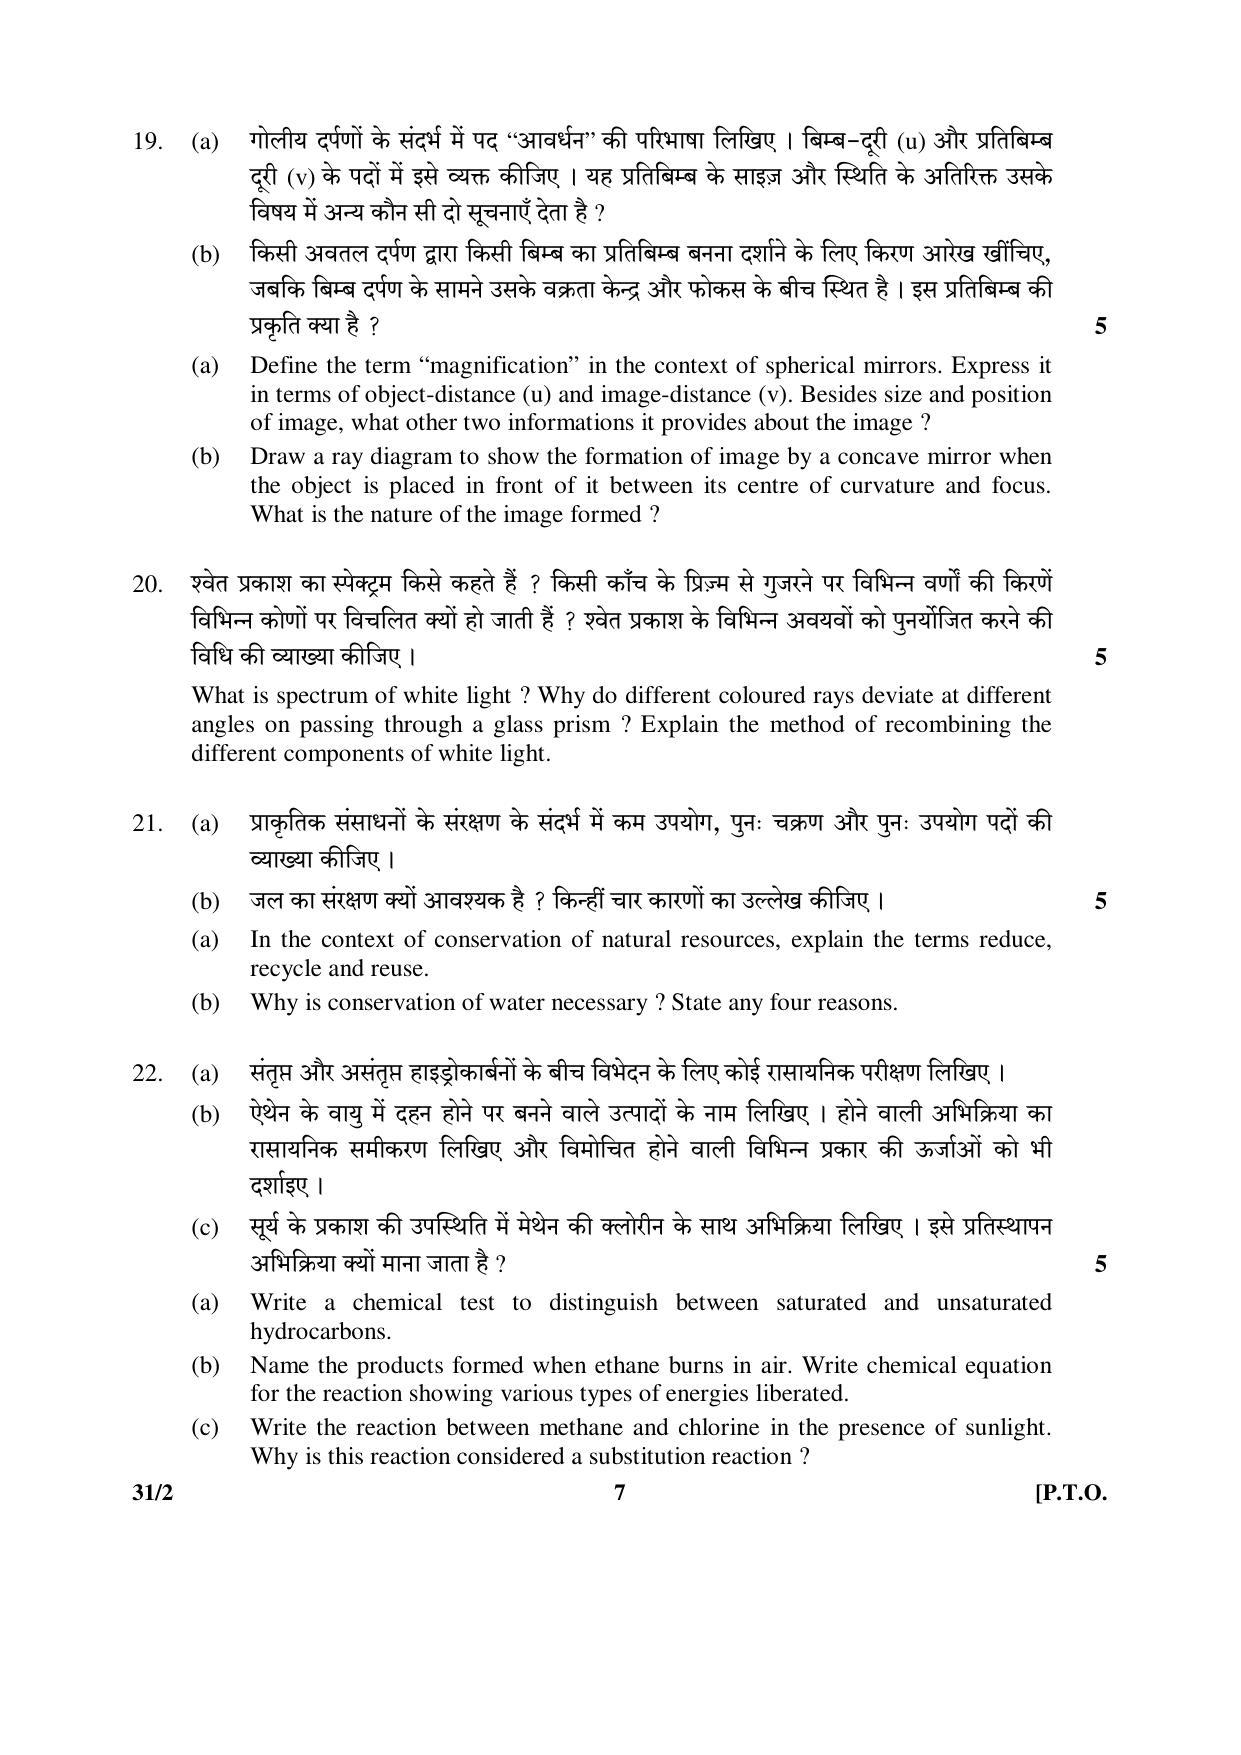 CBSE Class 10 31-2 (Science) 2017-comptt Question Paper - Page 7